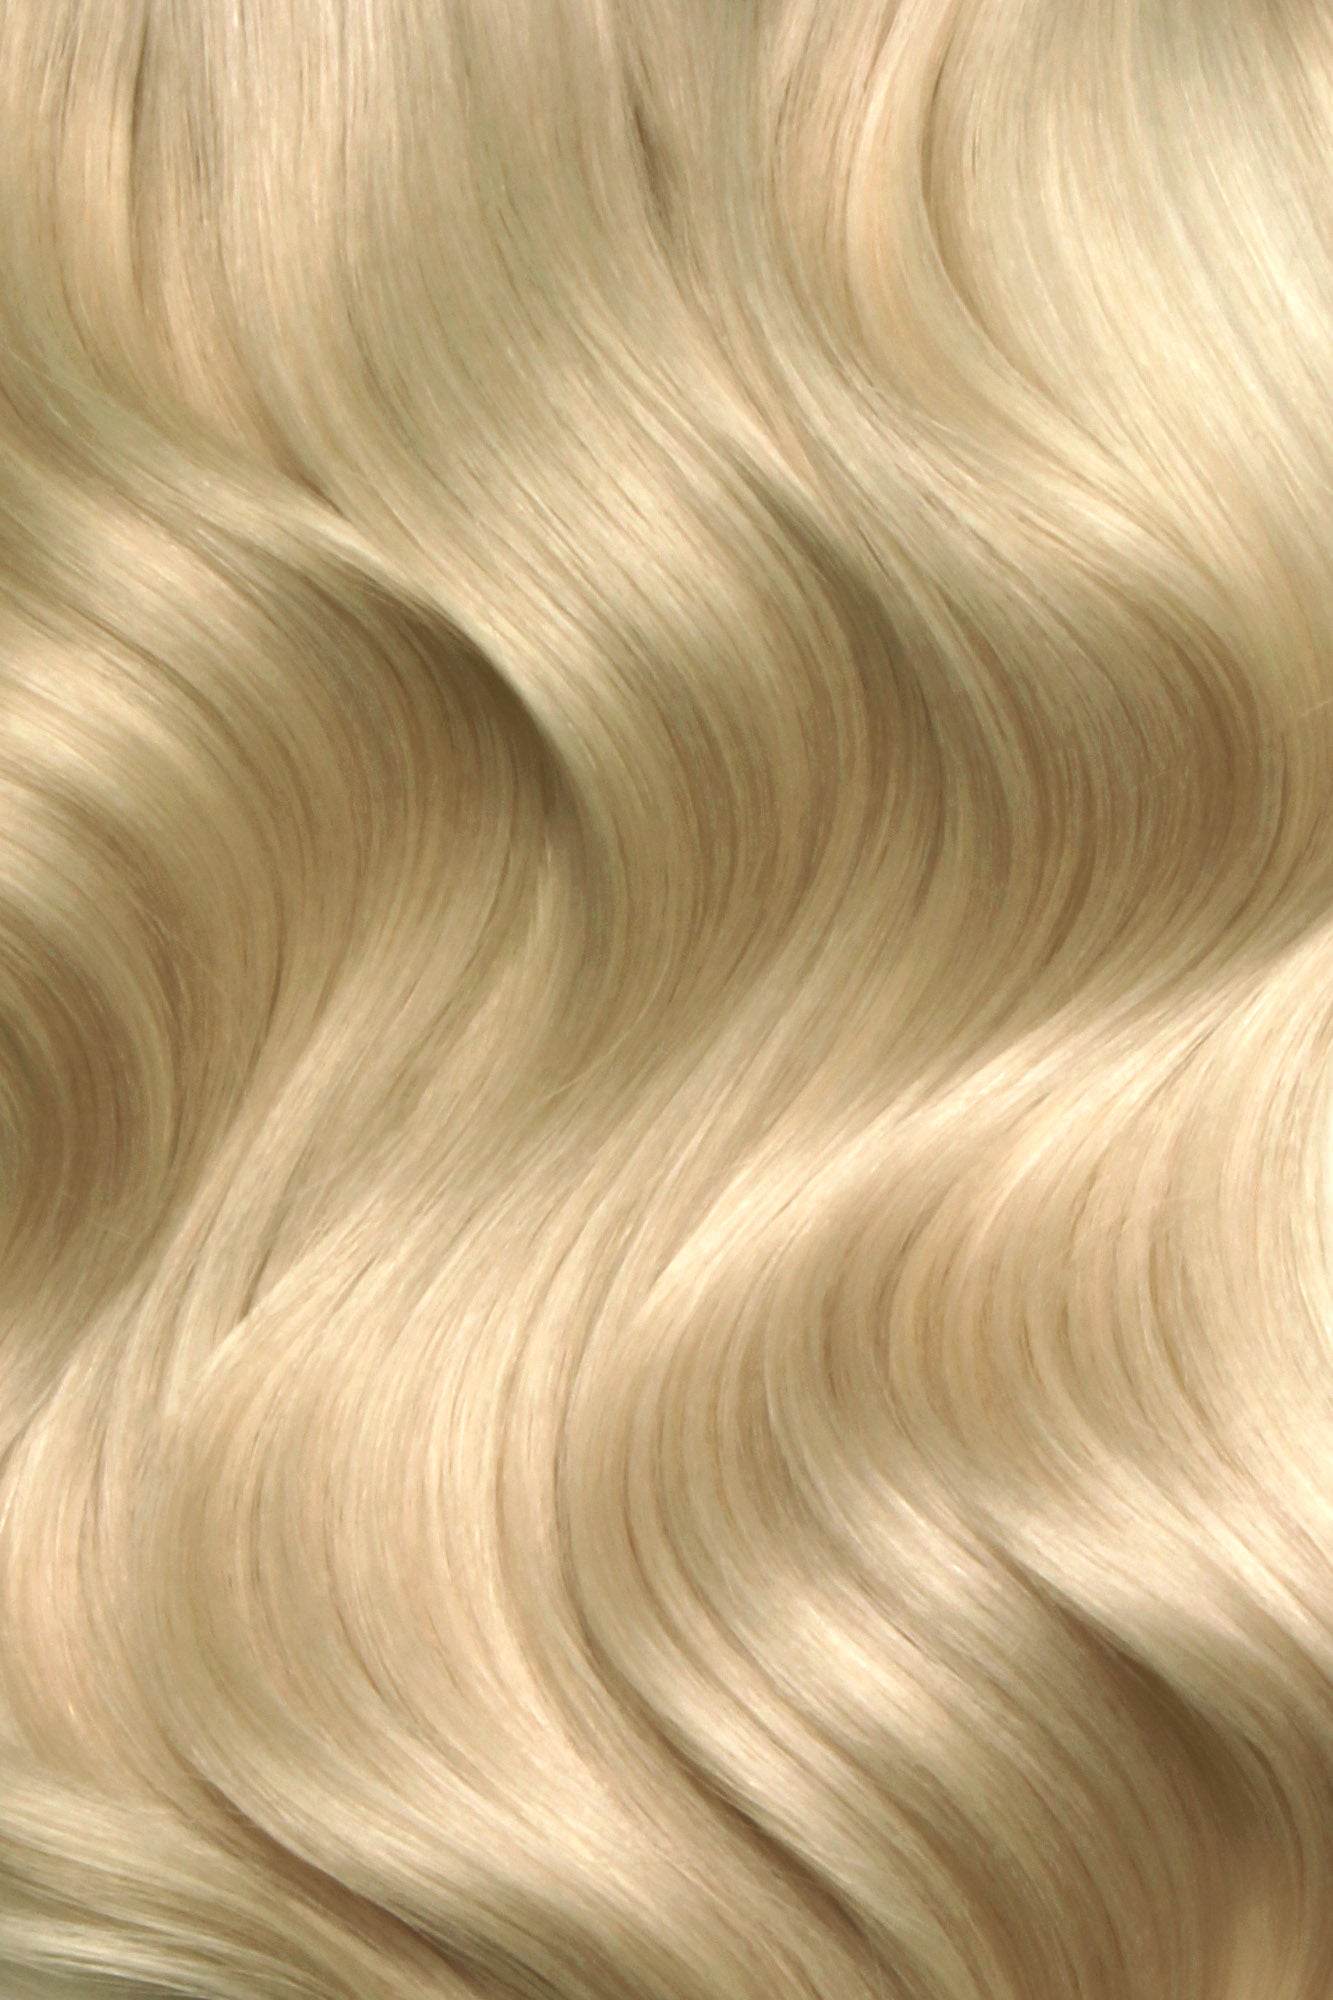 SEAMLESS® Flat Weft 22 Inches - SWAY Hair Extensions LA-Blonde-613-24 Natural SEAMLESS® Flat Weft 22 Inches extensions. Thin, flexible, and discreet. 100% Double Drawn Remy Human Hair. Versatile and reusable